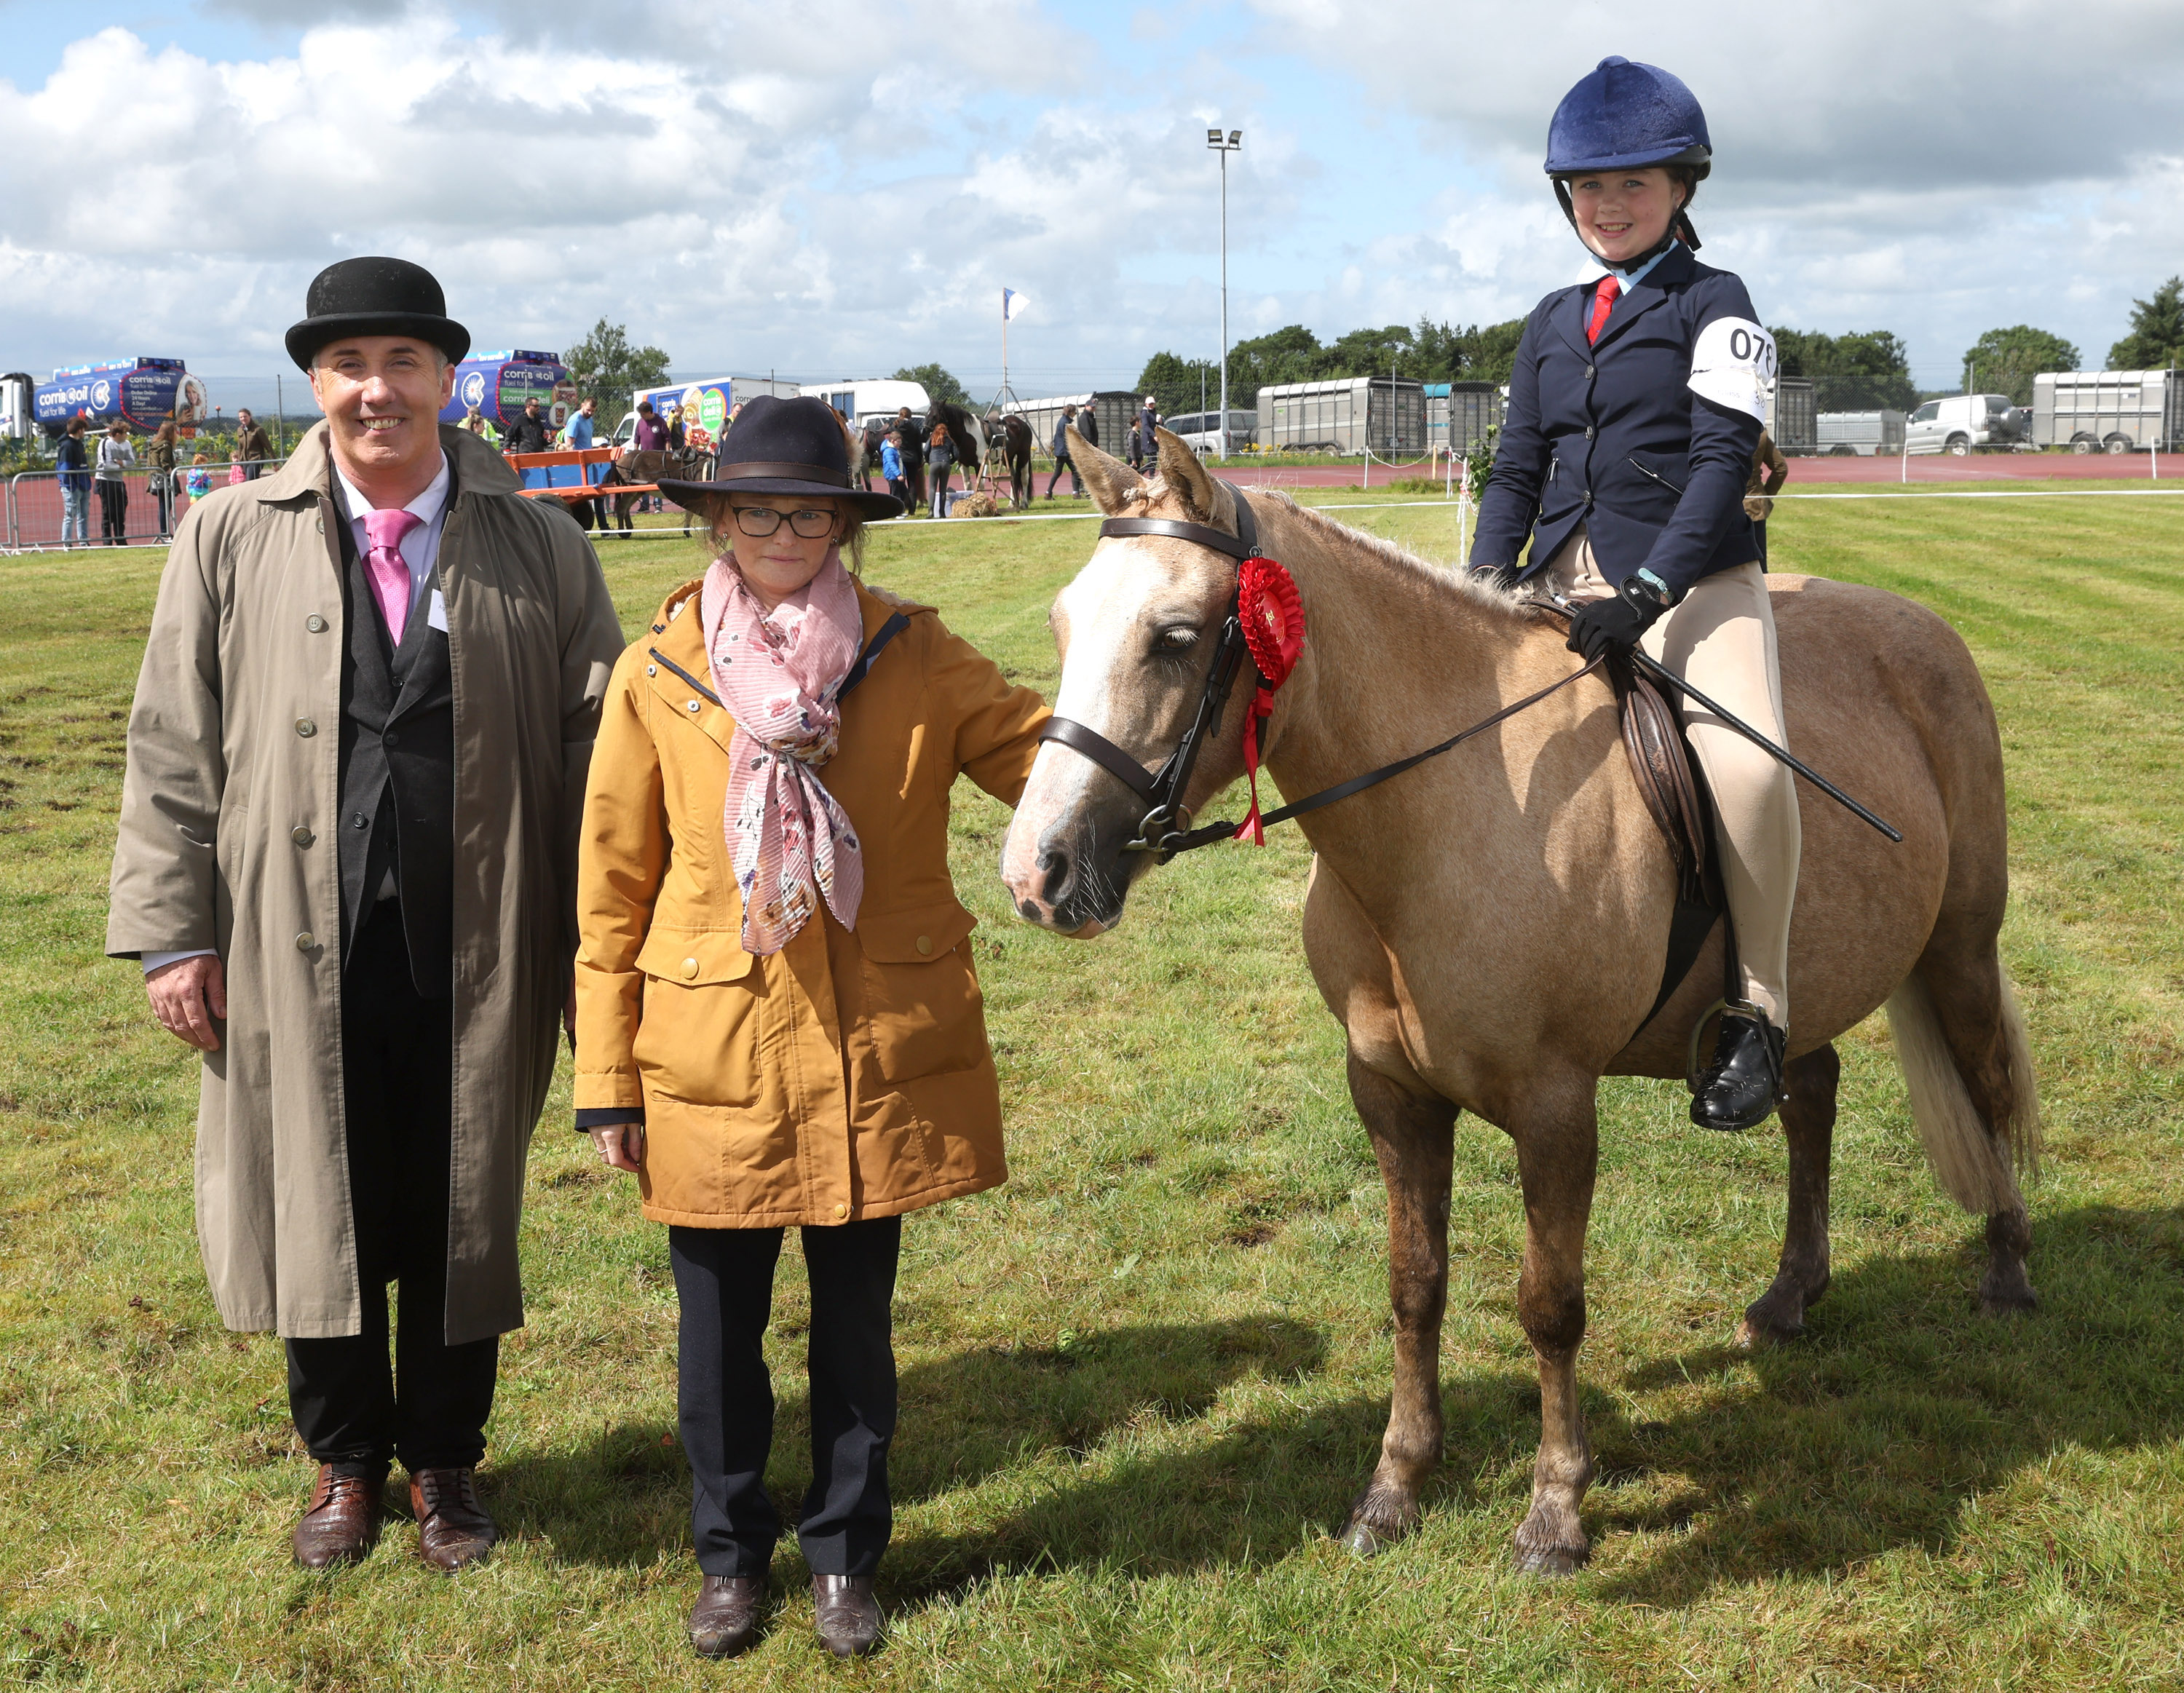 Chloe Hallinan Killawalla Westport Co Mayo winner in Open Show Pony 138 cm rider correct age (sponsored by Townley Medical) at the Claremorris 103rd Show in Claremorris on 5th August, pictured with judges  PJ Watson and Laura McWeeney. Photo © Michael Donnelly